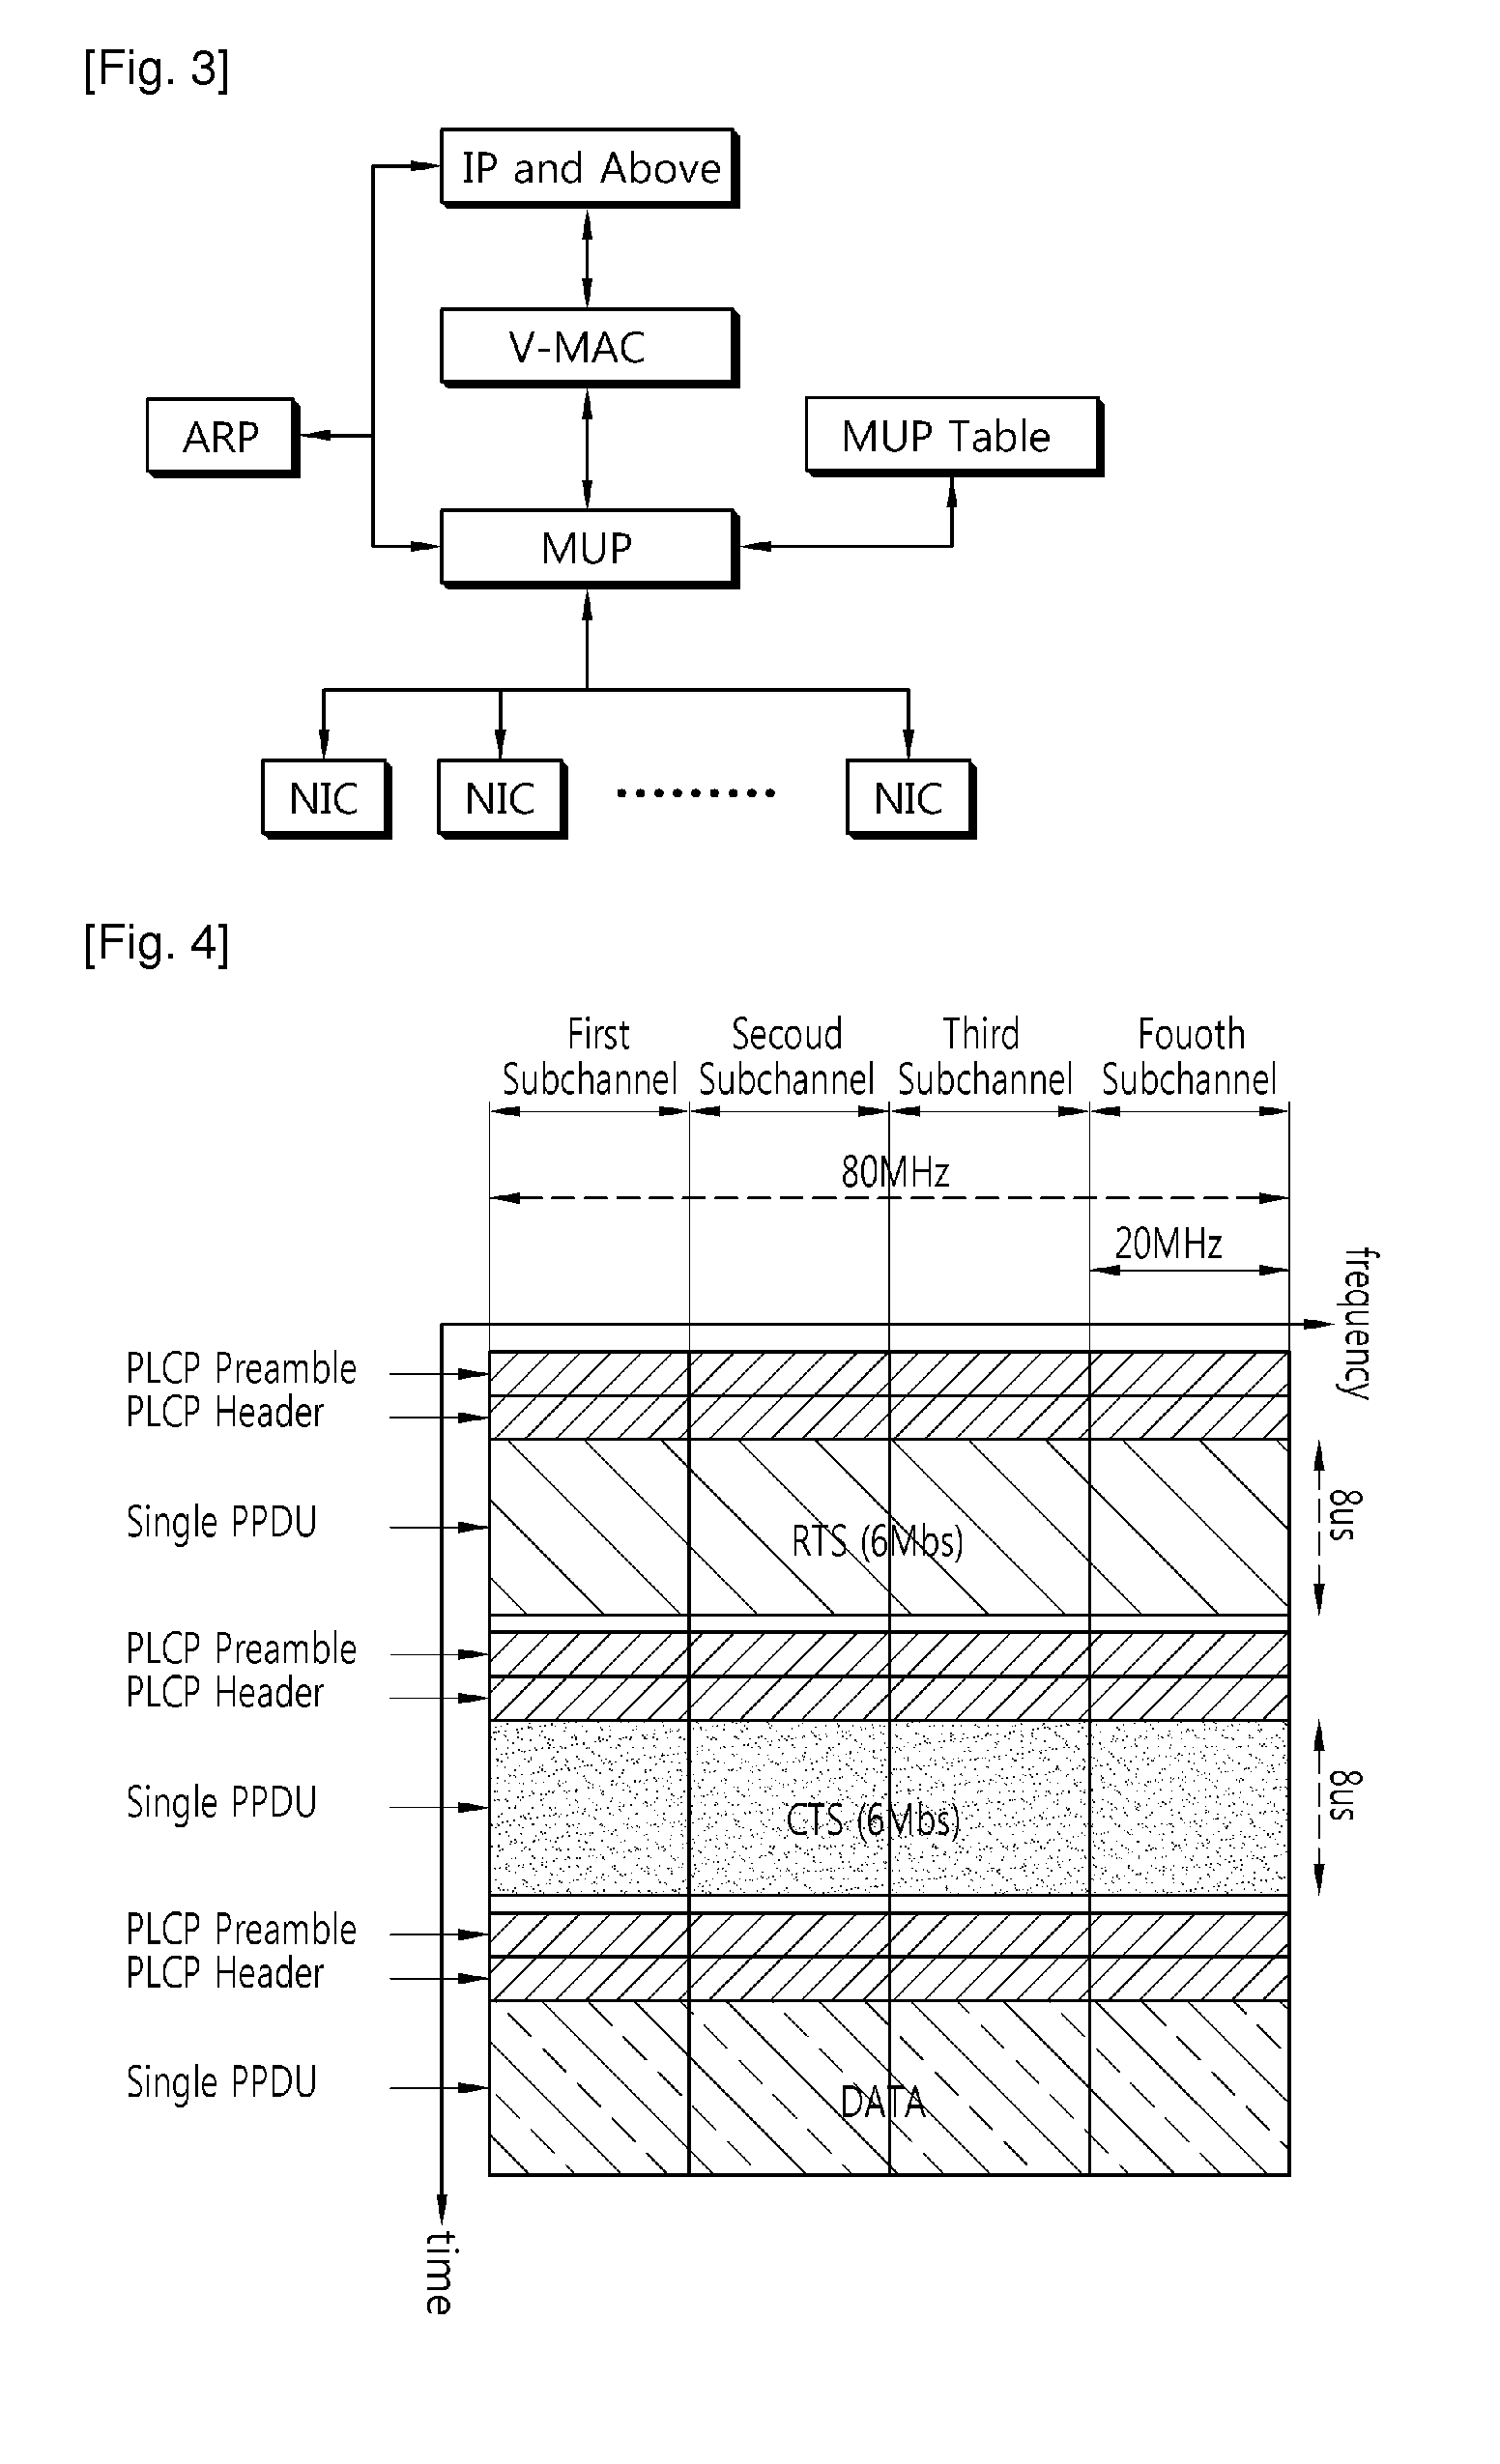 Channel access method for very high throughput (VHT) wireless local access network system